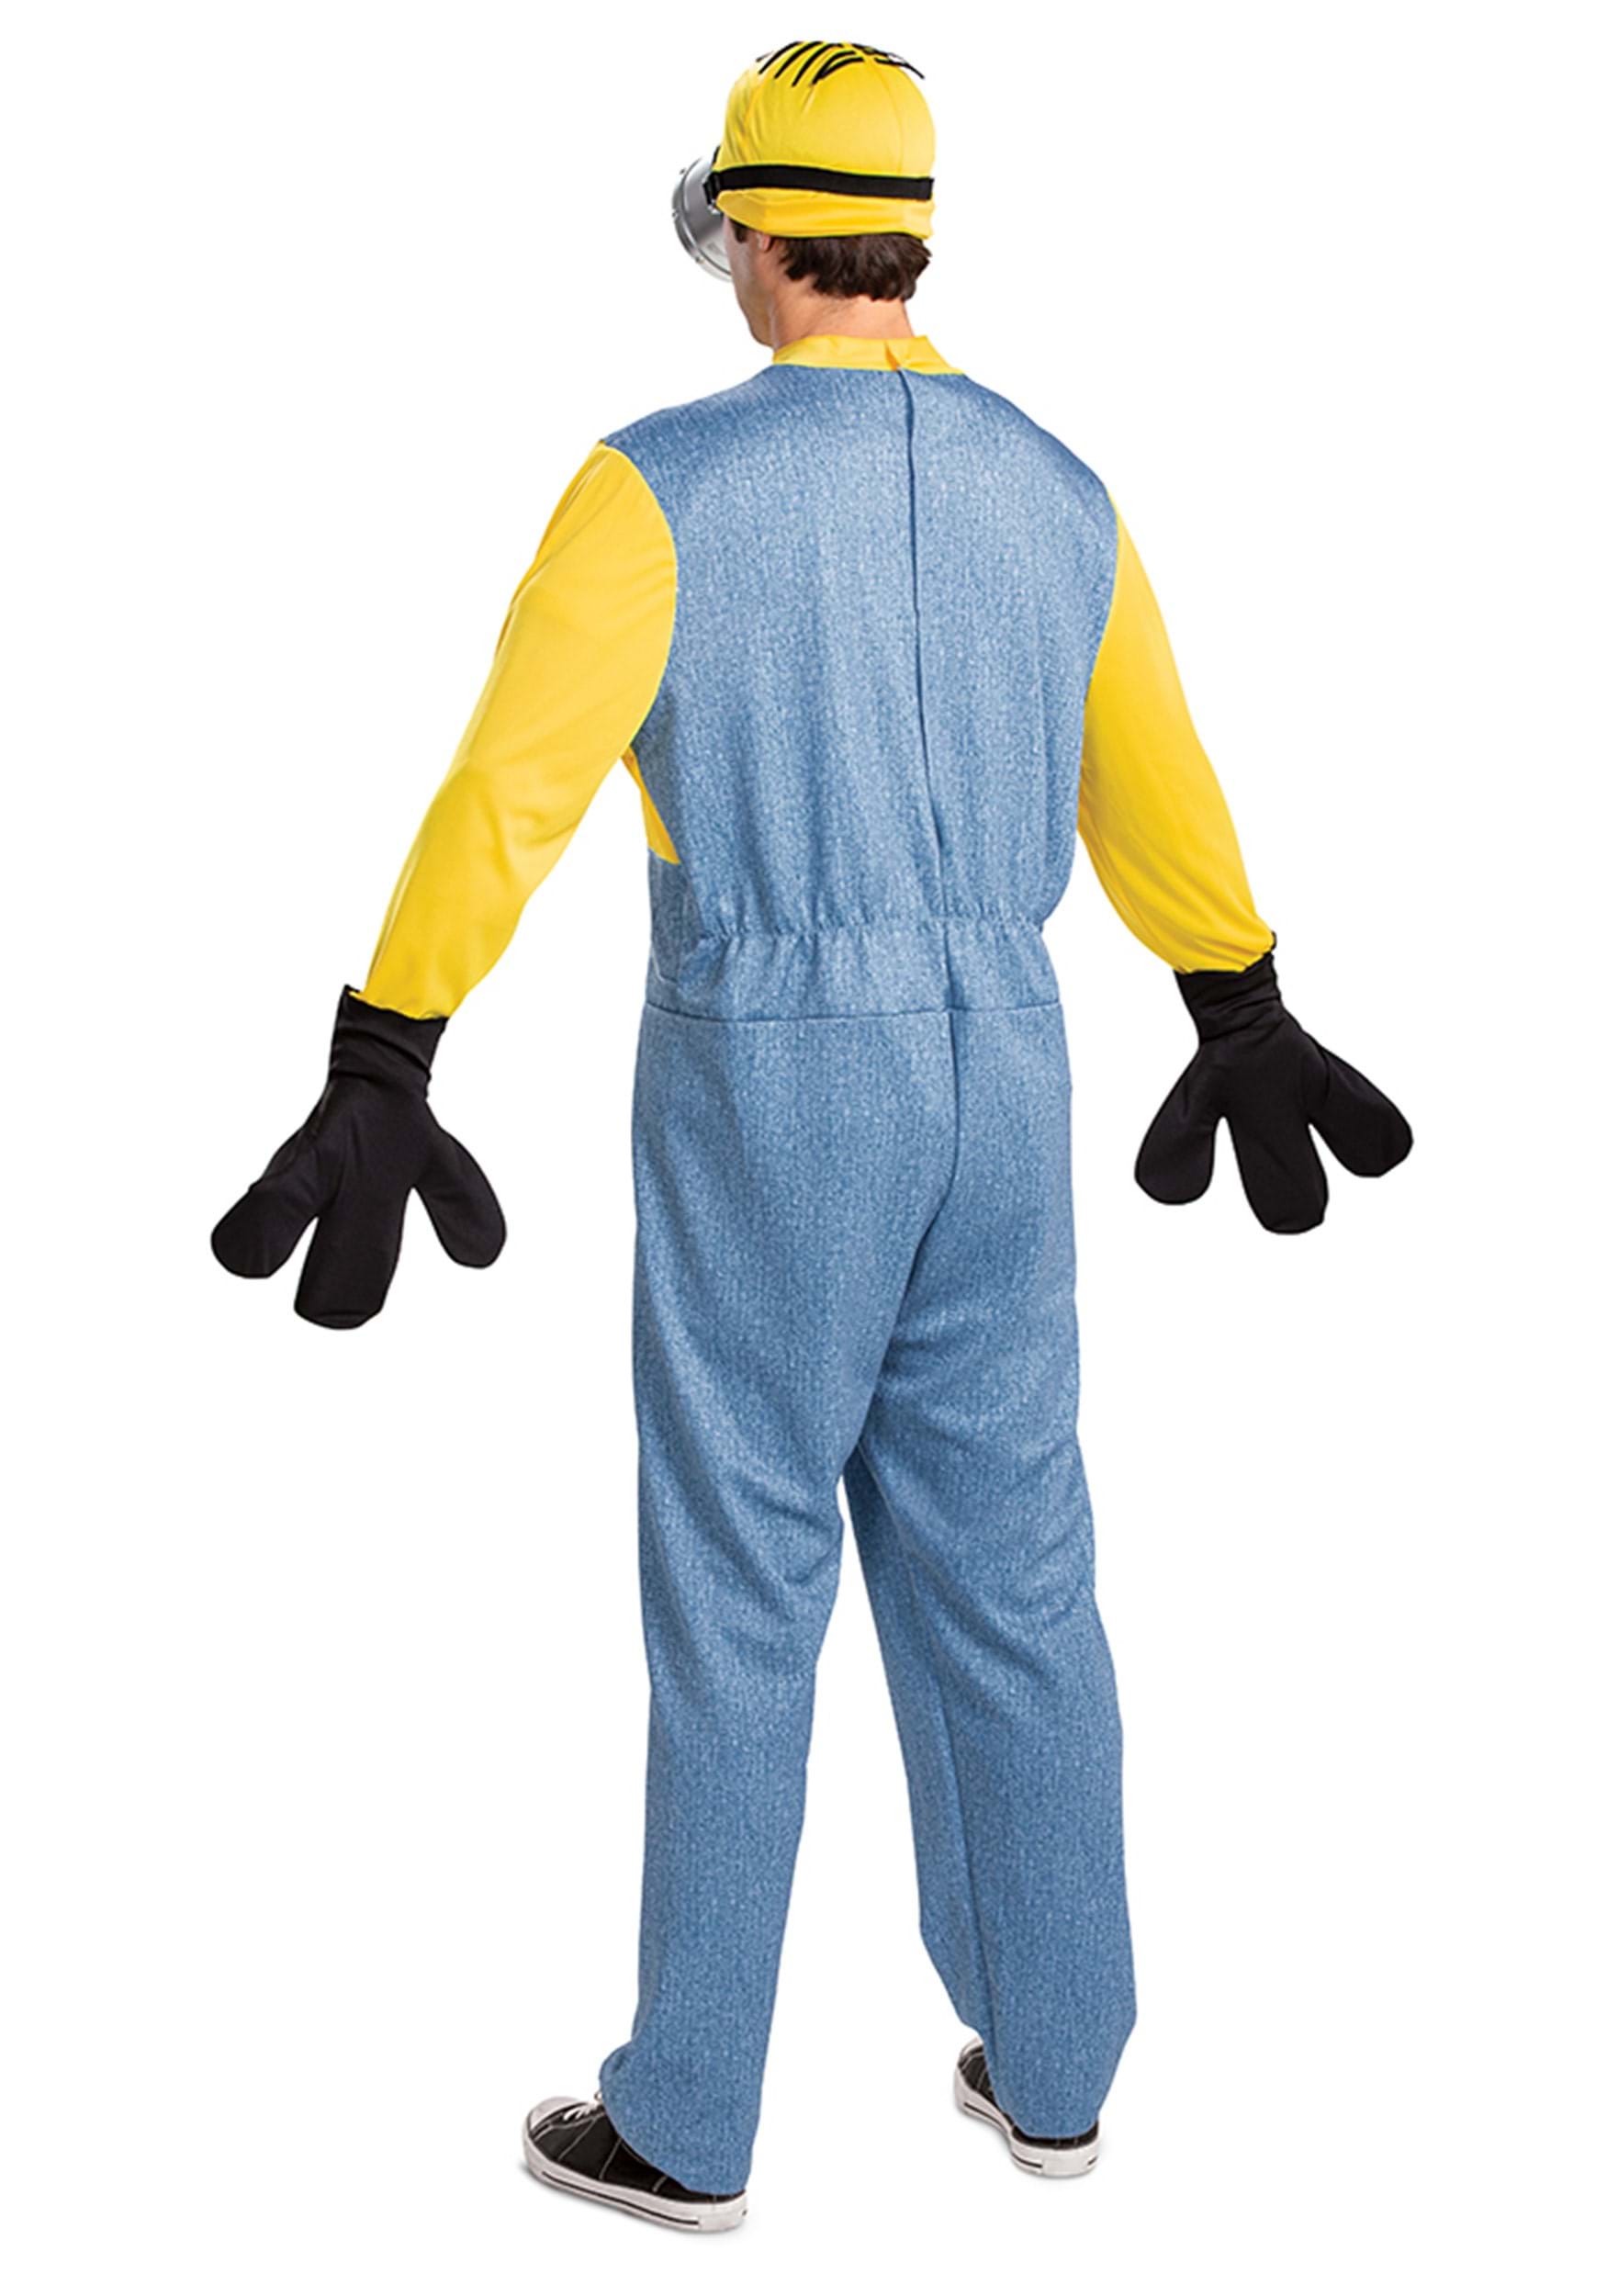 sleep Rendition beneficial Deluxe Adult Minion Costume